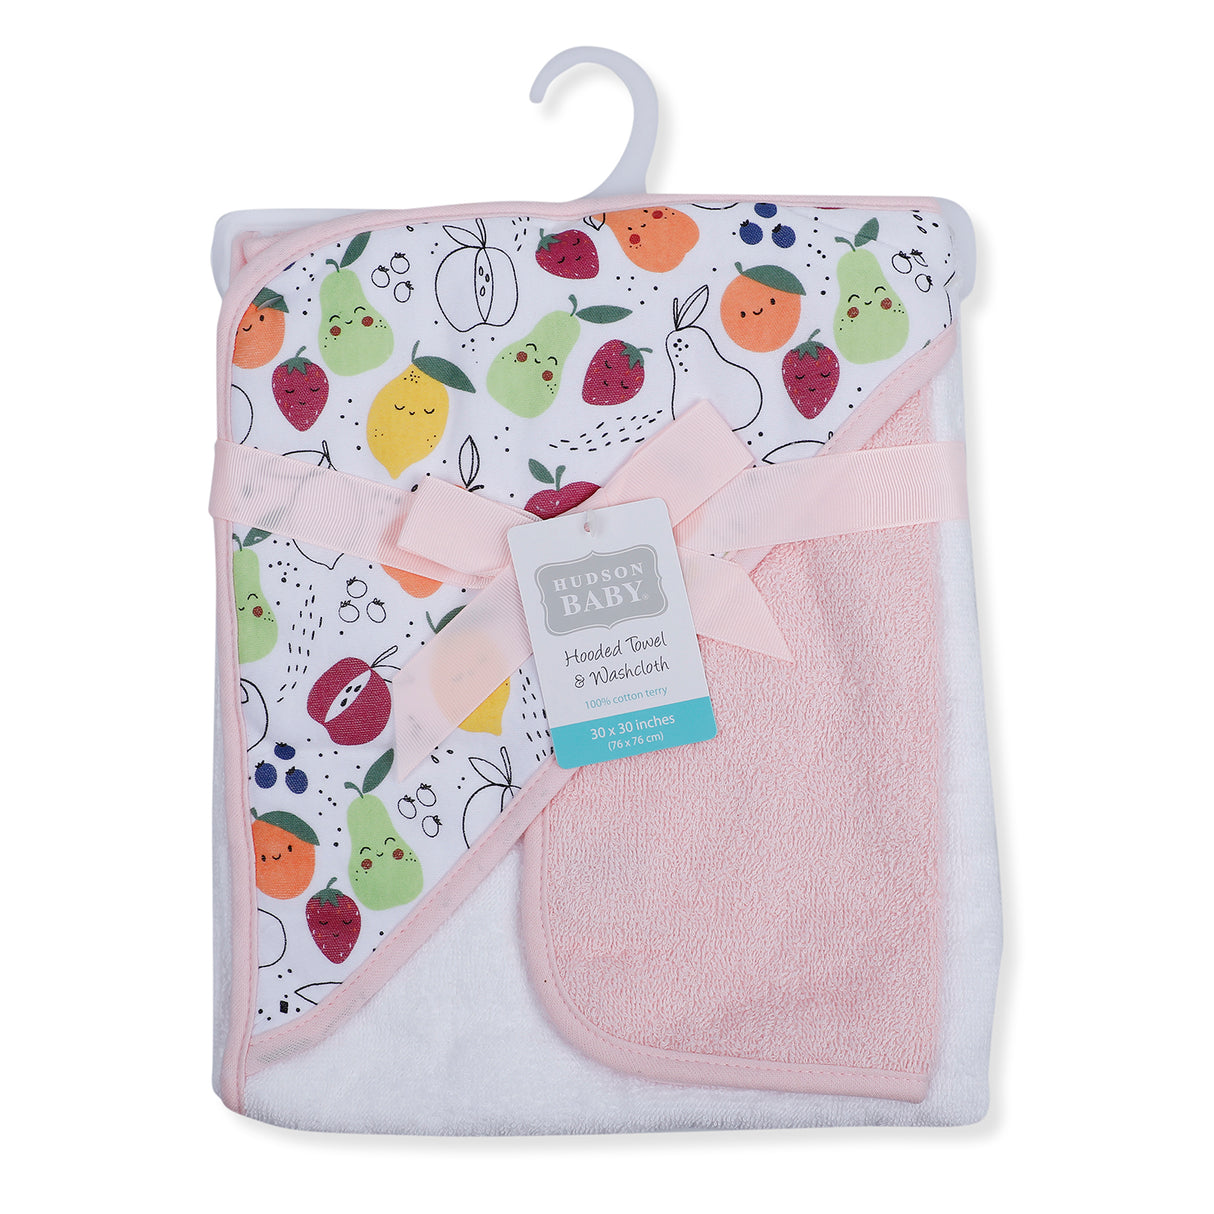 Hudson Baby Hooded Towel And Wash Cloth Set